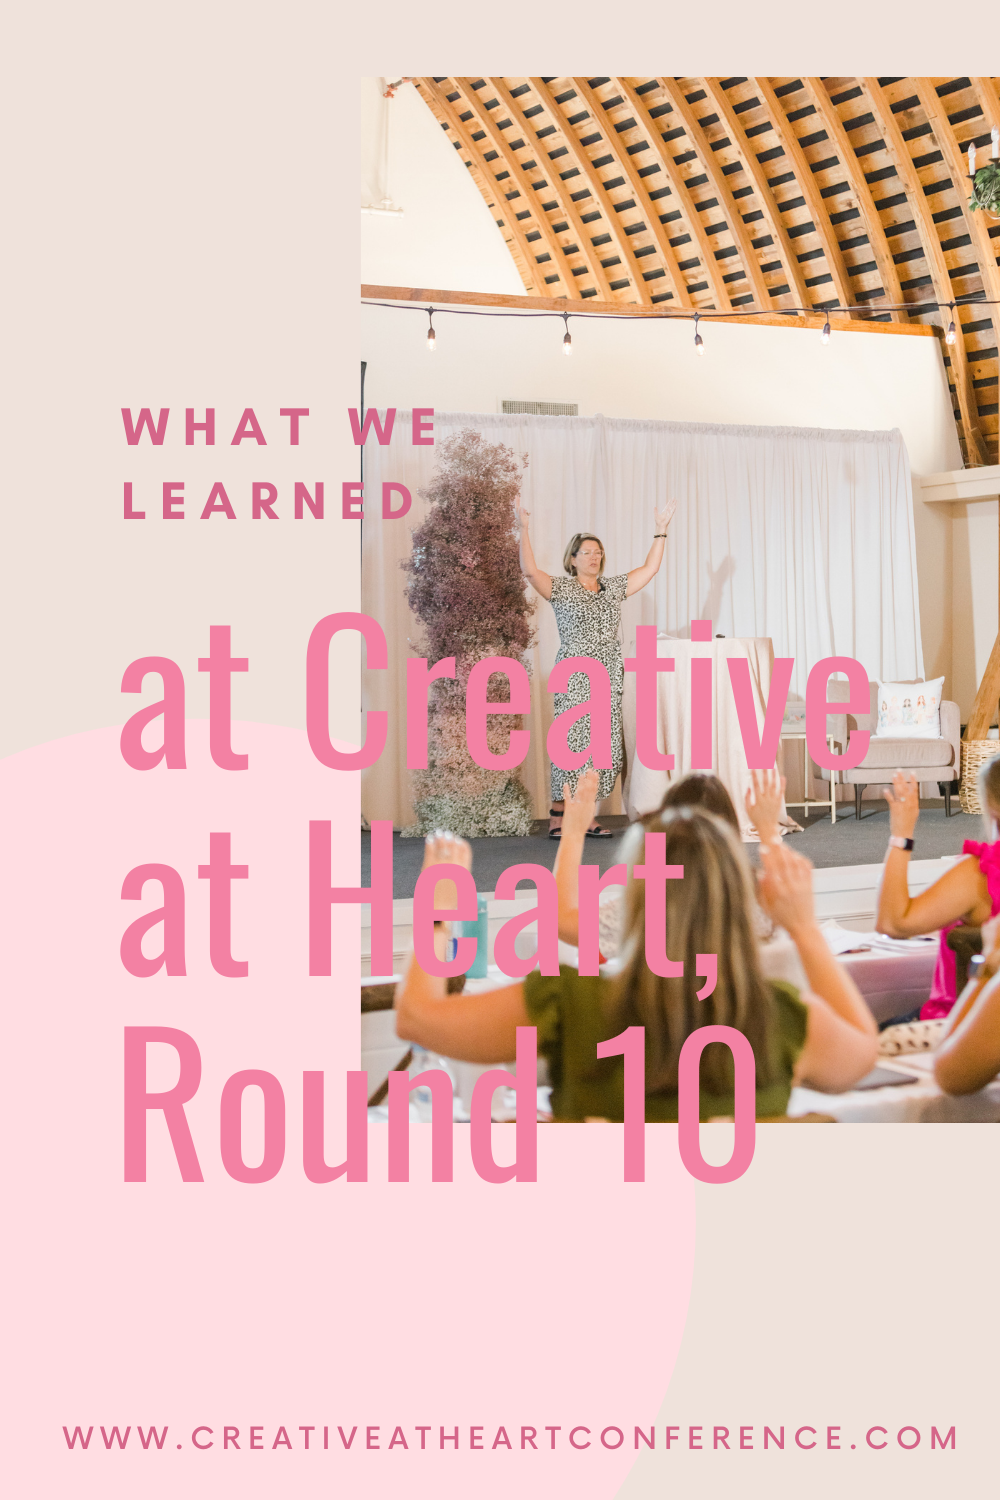 3 Things we learned from Creative at Heart Conference: Owner of Stationery HQ shares what she learned from attending C@H Round 10 as a creative entrepreneur. Guest post on Creative at Heart blog